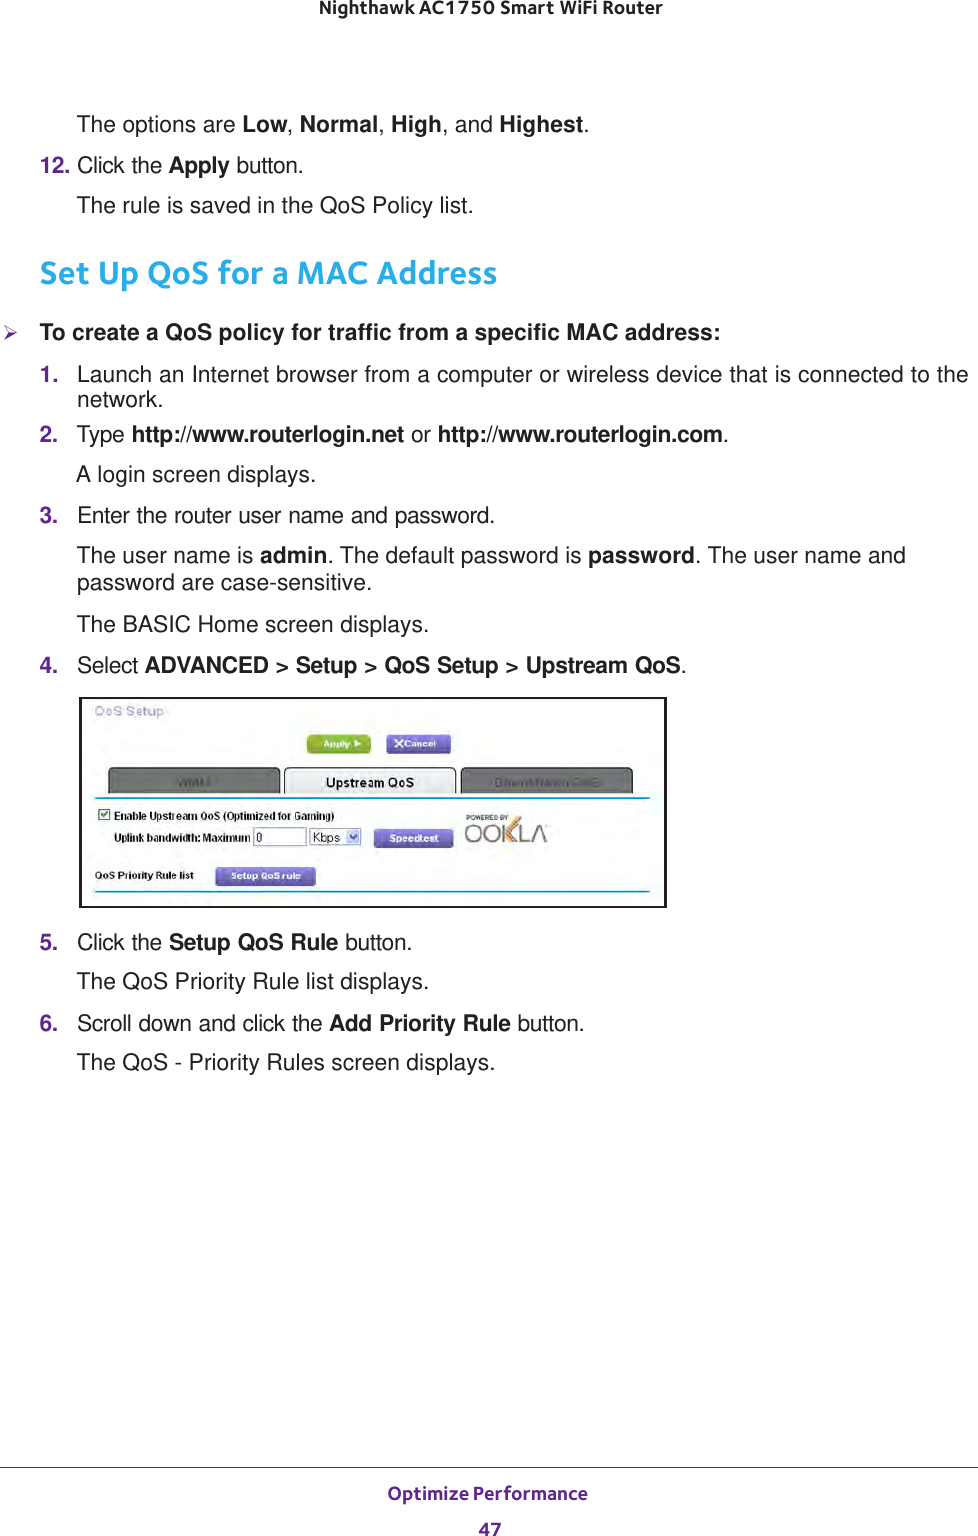 Optimize Performance 47 Nighthawk AC1750 Smart WiFi RouterThe options are Low, Normal, High, and Highest.12. Click the Apply button.The rule is saved in the QoS Policy list.Set Up QoS for a MAC AddressTo create a QoS policy for traffic from a specific MAC address:1.  Launch an Internet browser from a computer or wireless device that is connected to the network.2.  Type http://www.routerlogin.net or http://www.routerlogin.com.A login screen displays.3.  Enter the router user name and password.The user name is admin. The default password is password. The user name and password are case-sensitive.The BASIC Home screen displays.4.  Select ADVANCED &gt; Setup &gt; QoS Setup &gt; Upstream QoS.5.  Click the Setup QoS Rule button.The QoS Priority Rule list displays.6.  Scroll down and click the Add Priority Rule button.The QoS - Priority Rules screen displays.